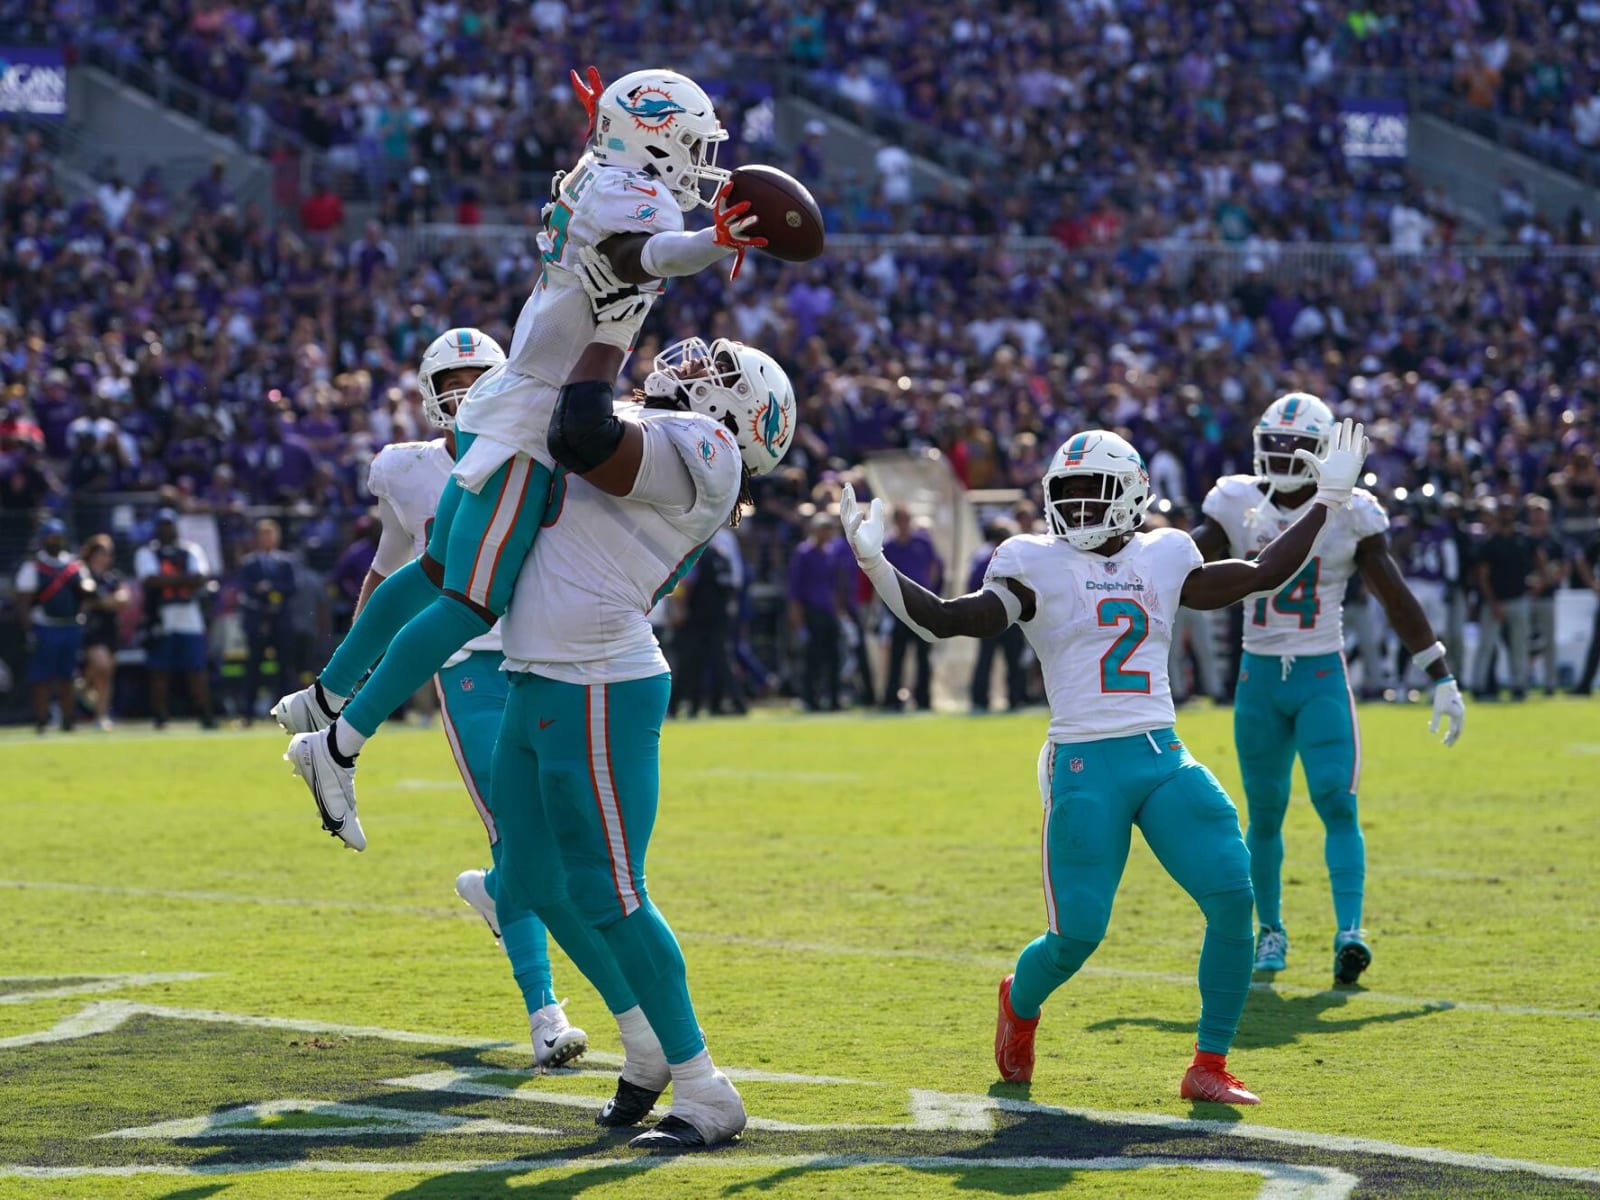 Post Game Wrap Up Show: Dolphins Beat Texans 28-3 - Miami Dolphins